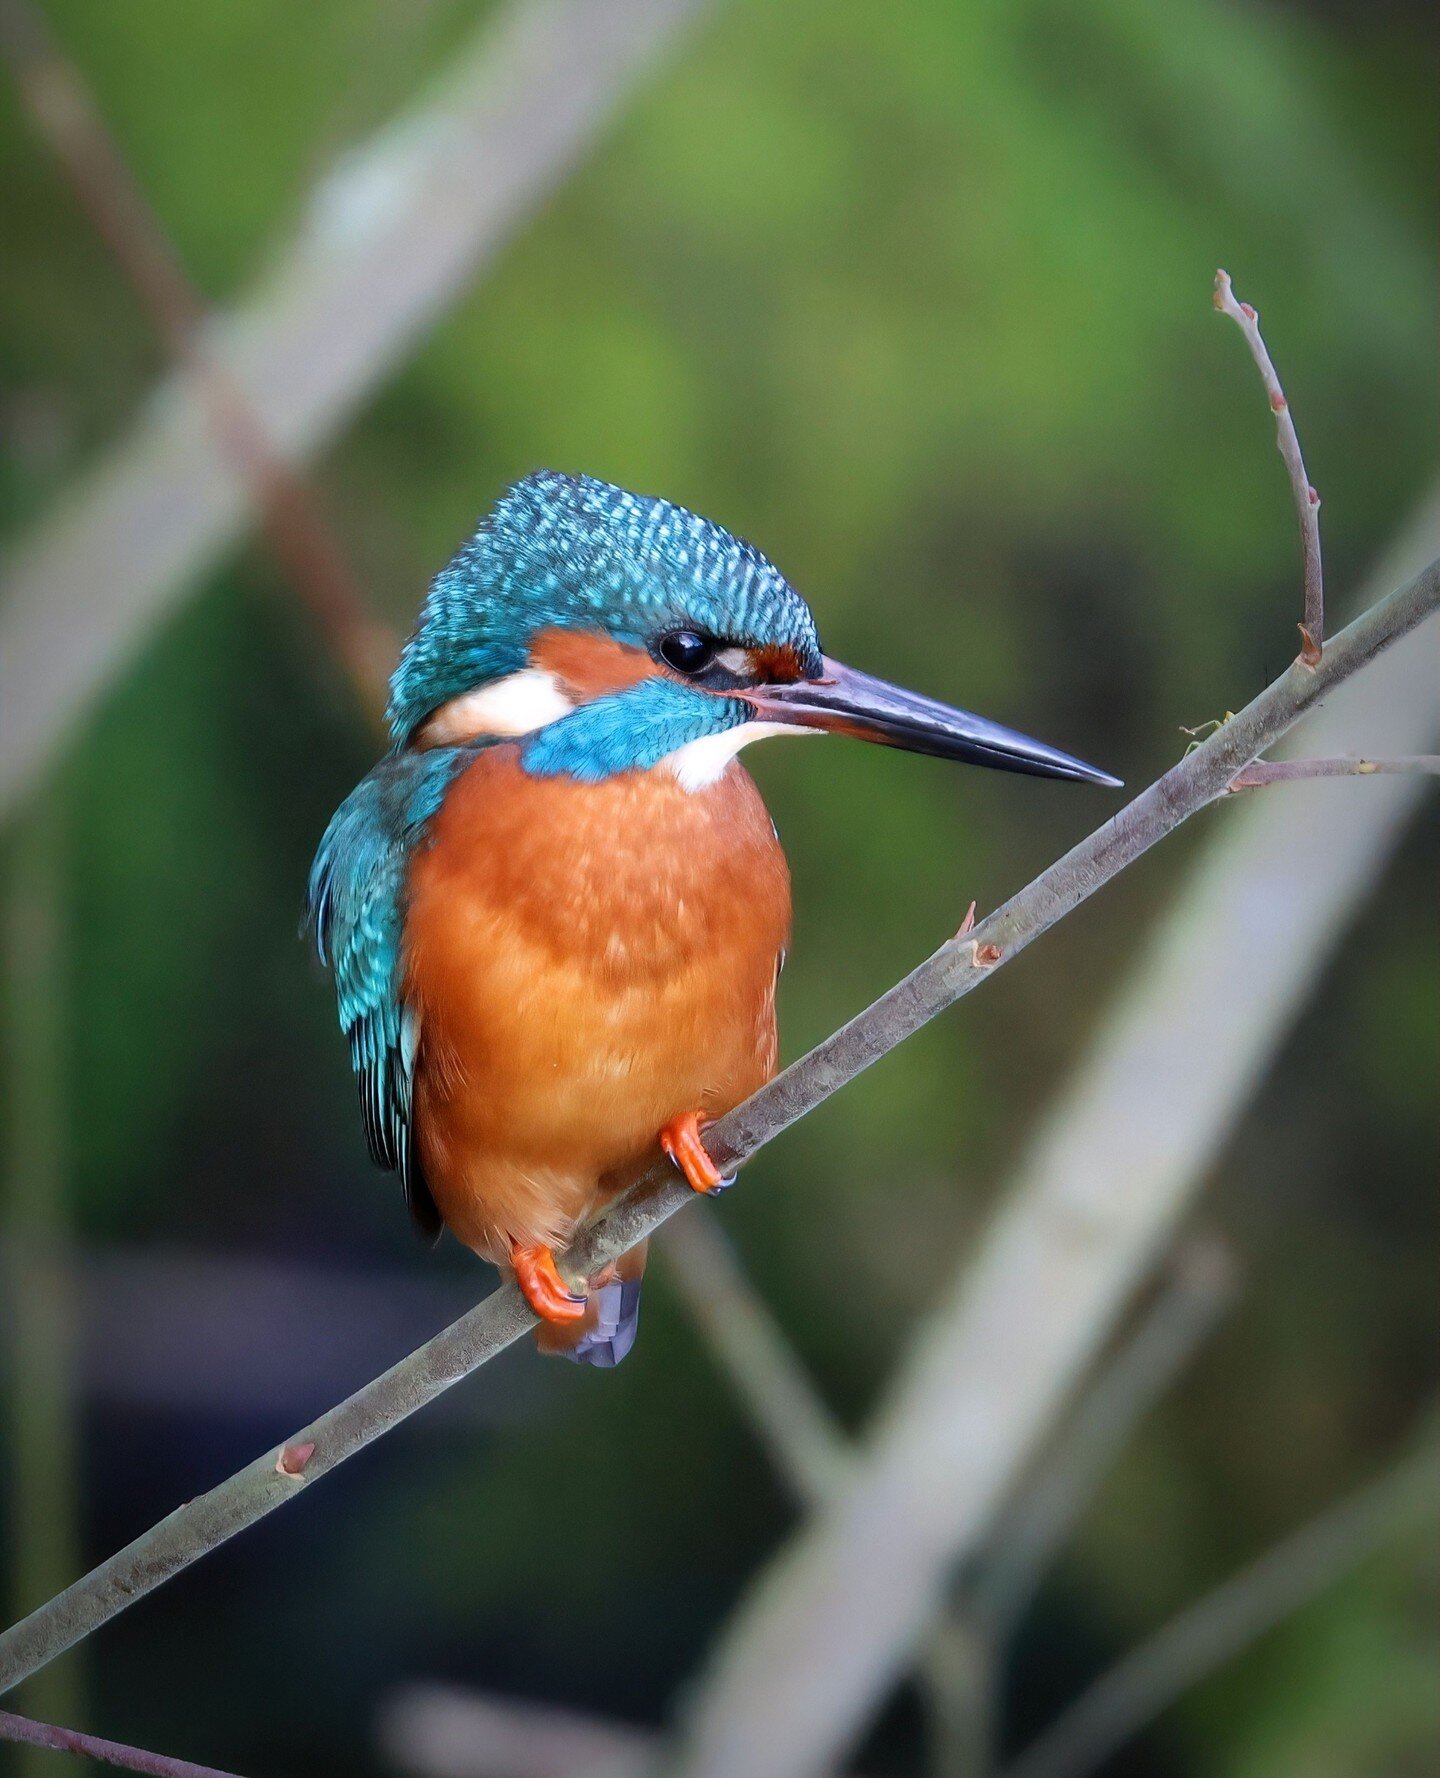 Spring Kingfishers adding early colour to the reed beds⁠
 🌼⁠
⁠
Photographer: Scott Duffield⁠
IG: @scott.duffield.photography⁠
FB: www.facebook.com/Scott.duffield.photography⁠
WB: scottduffieldphotography.pixieset.com⁠
Publication: @conkernaturemagaz